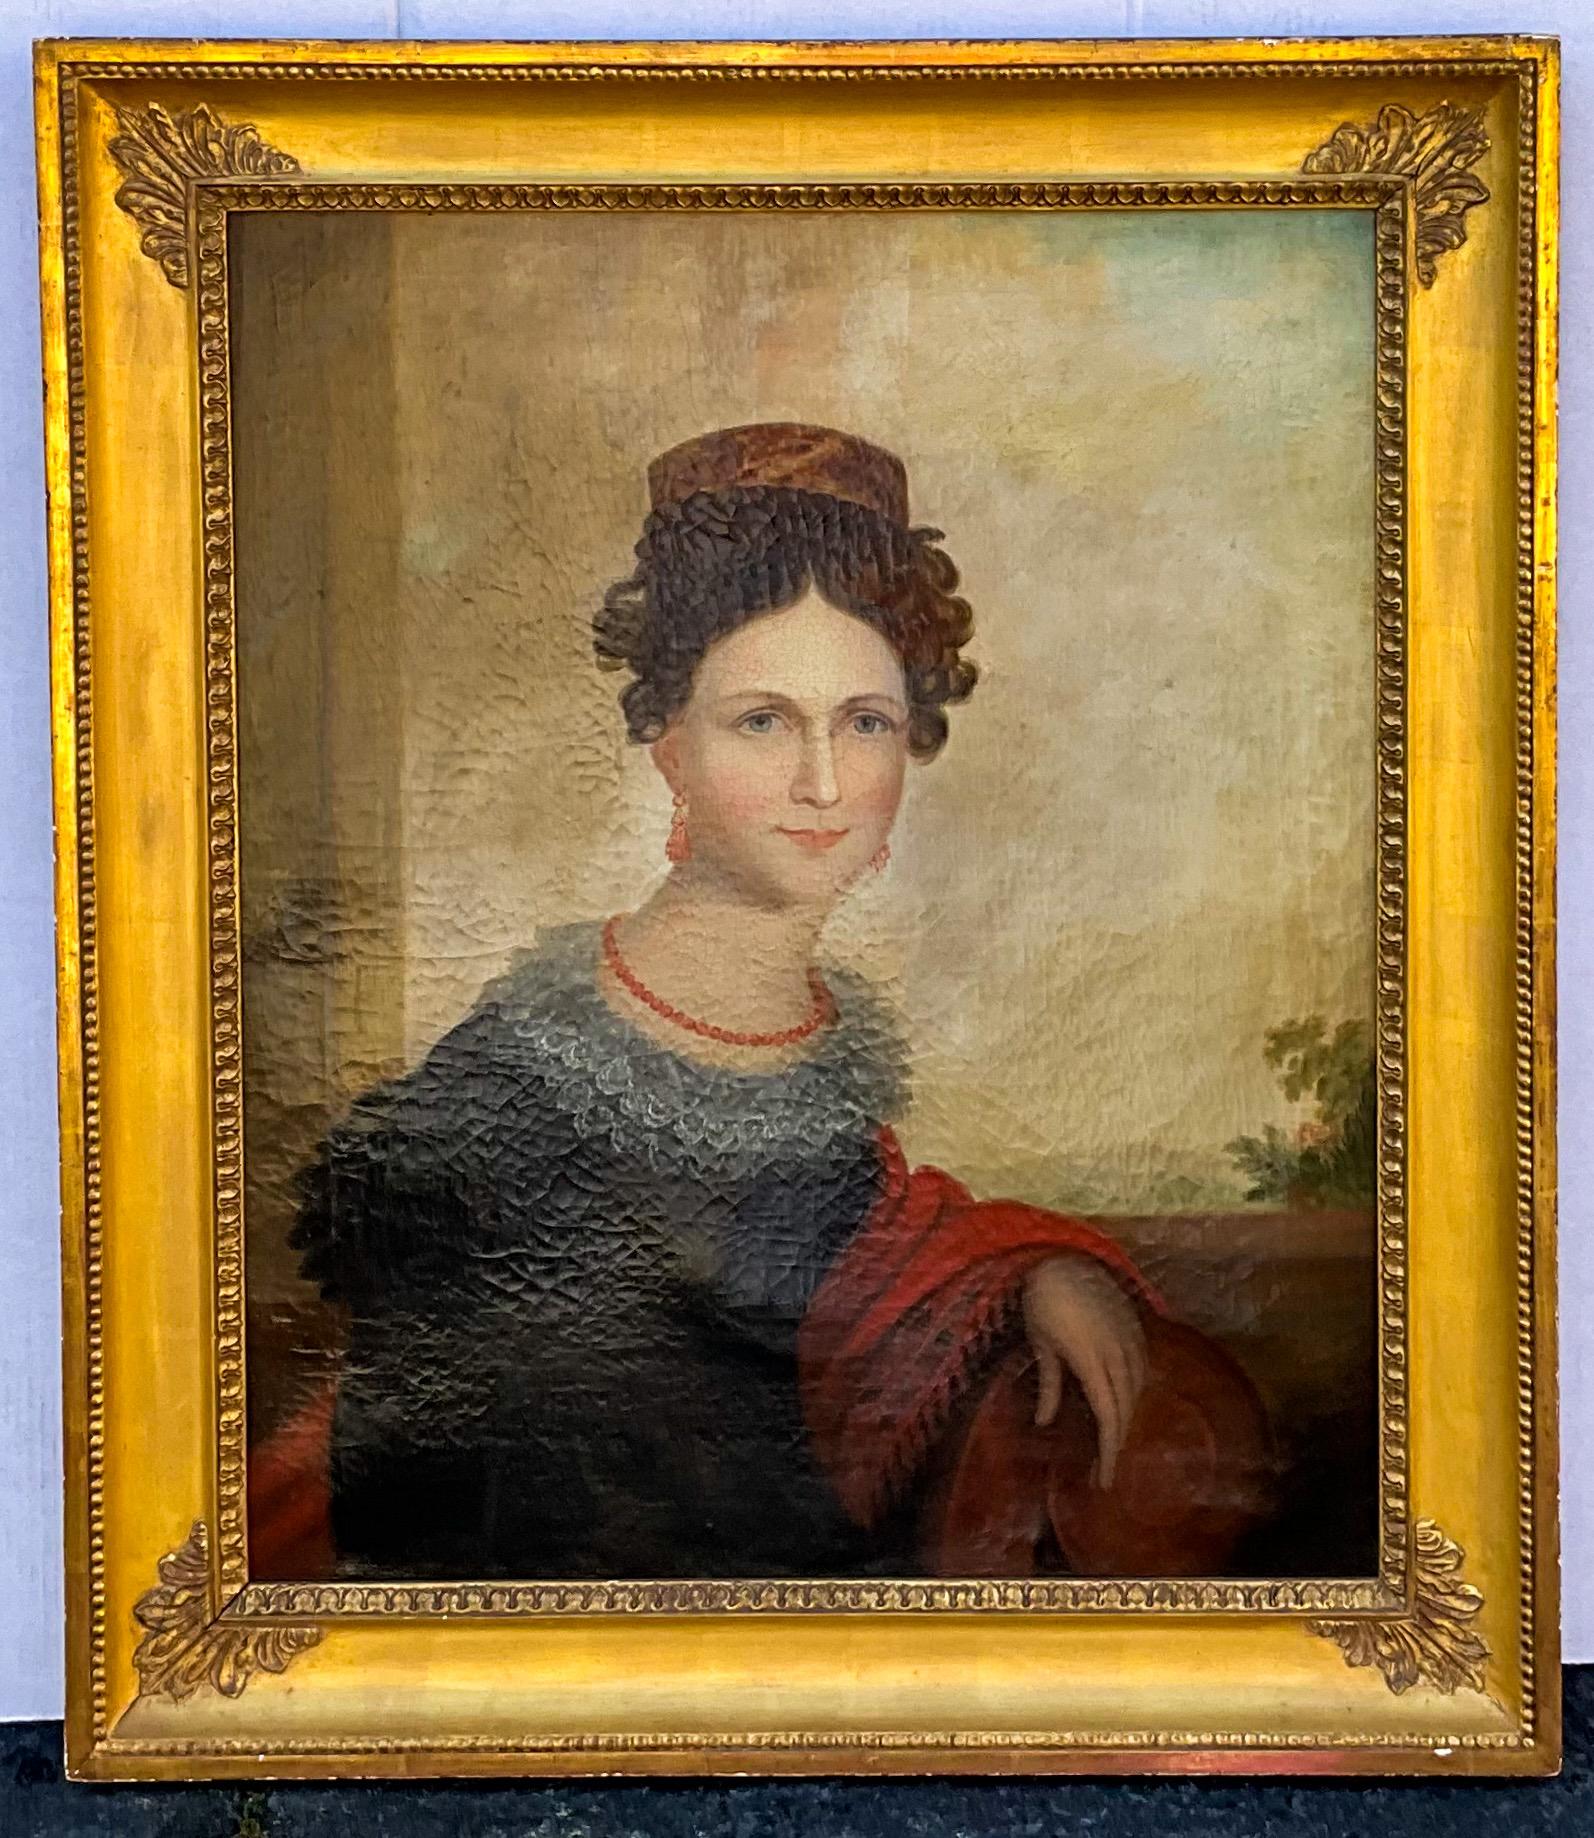 19th Century 19th-C. American Ancestral Portrait of a Young Woman W/ Victorian Styling, c 1840